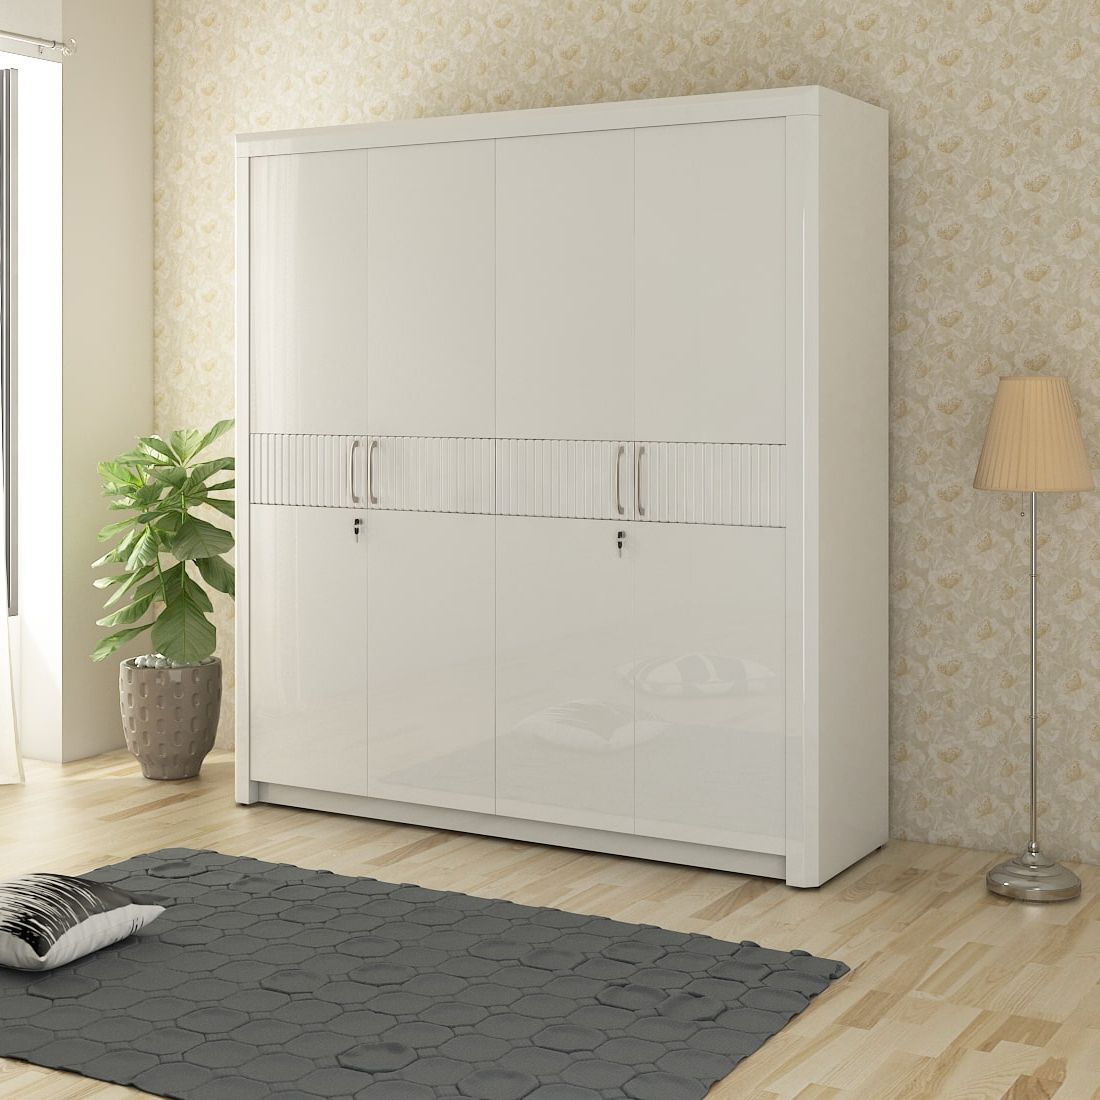 Preferred Arctic White Wardrobes Intended For Kosmo Arctic 4 Door Wardrobe High Gloss White (Photo 5 of 10)